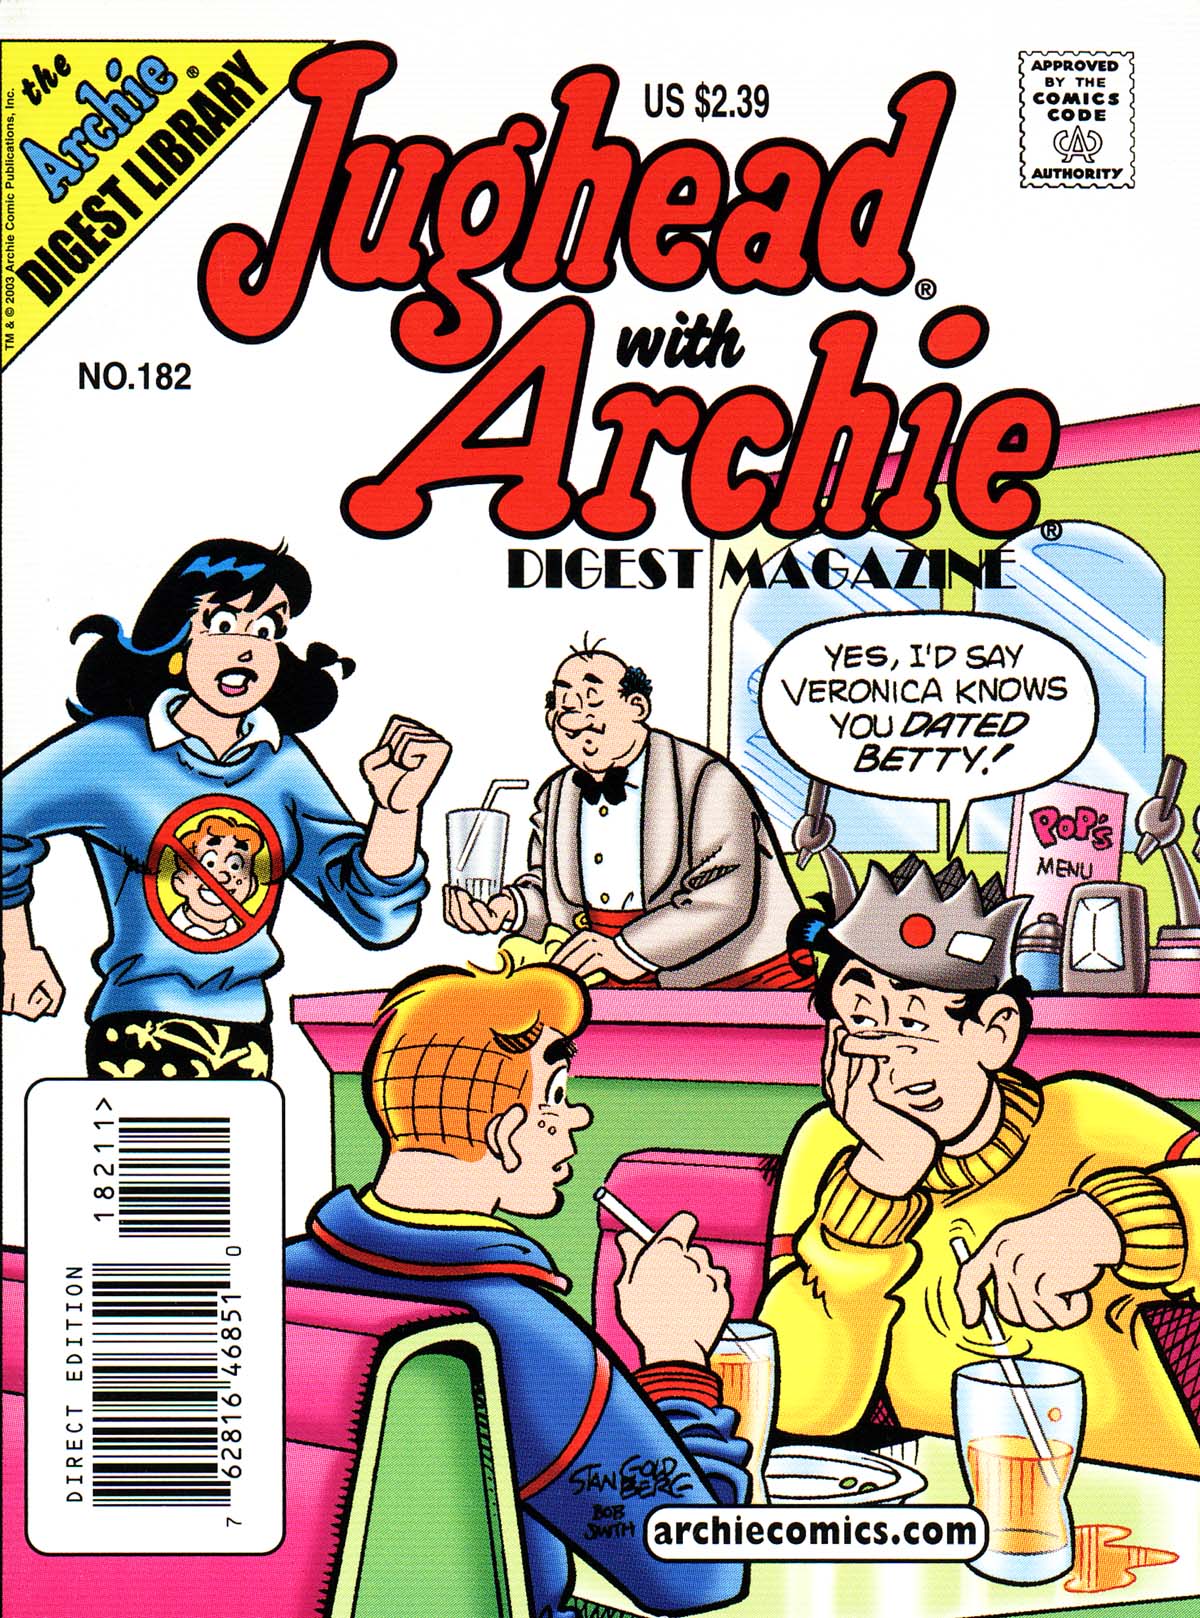 Read online Jughead with Archie Digest Magazine comic -  Issue #182 - 1